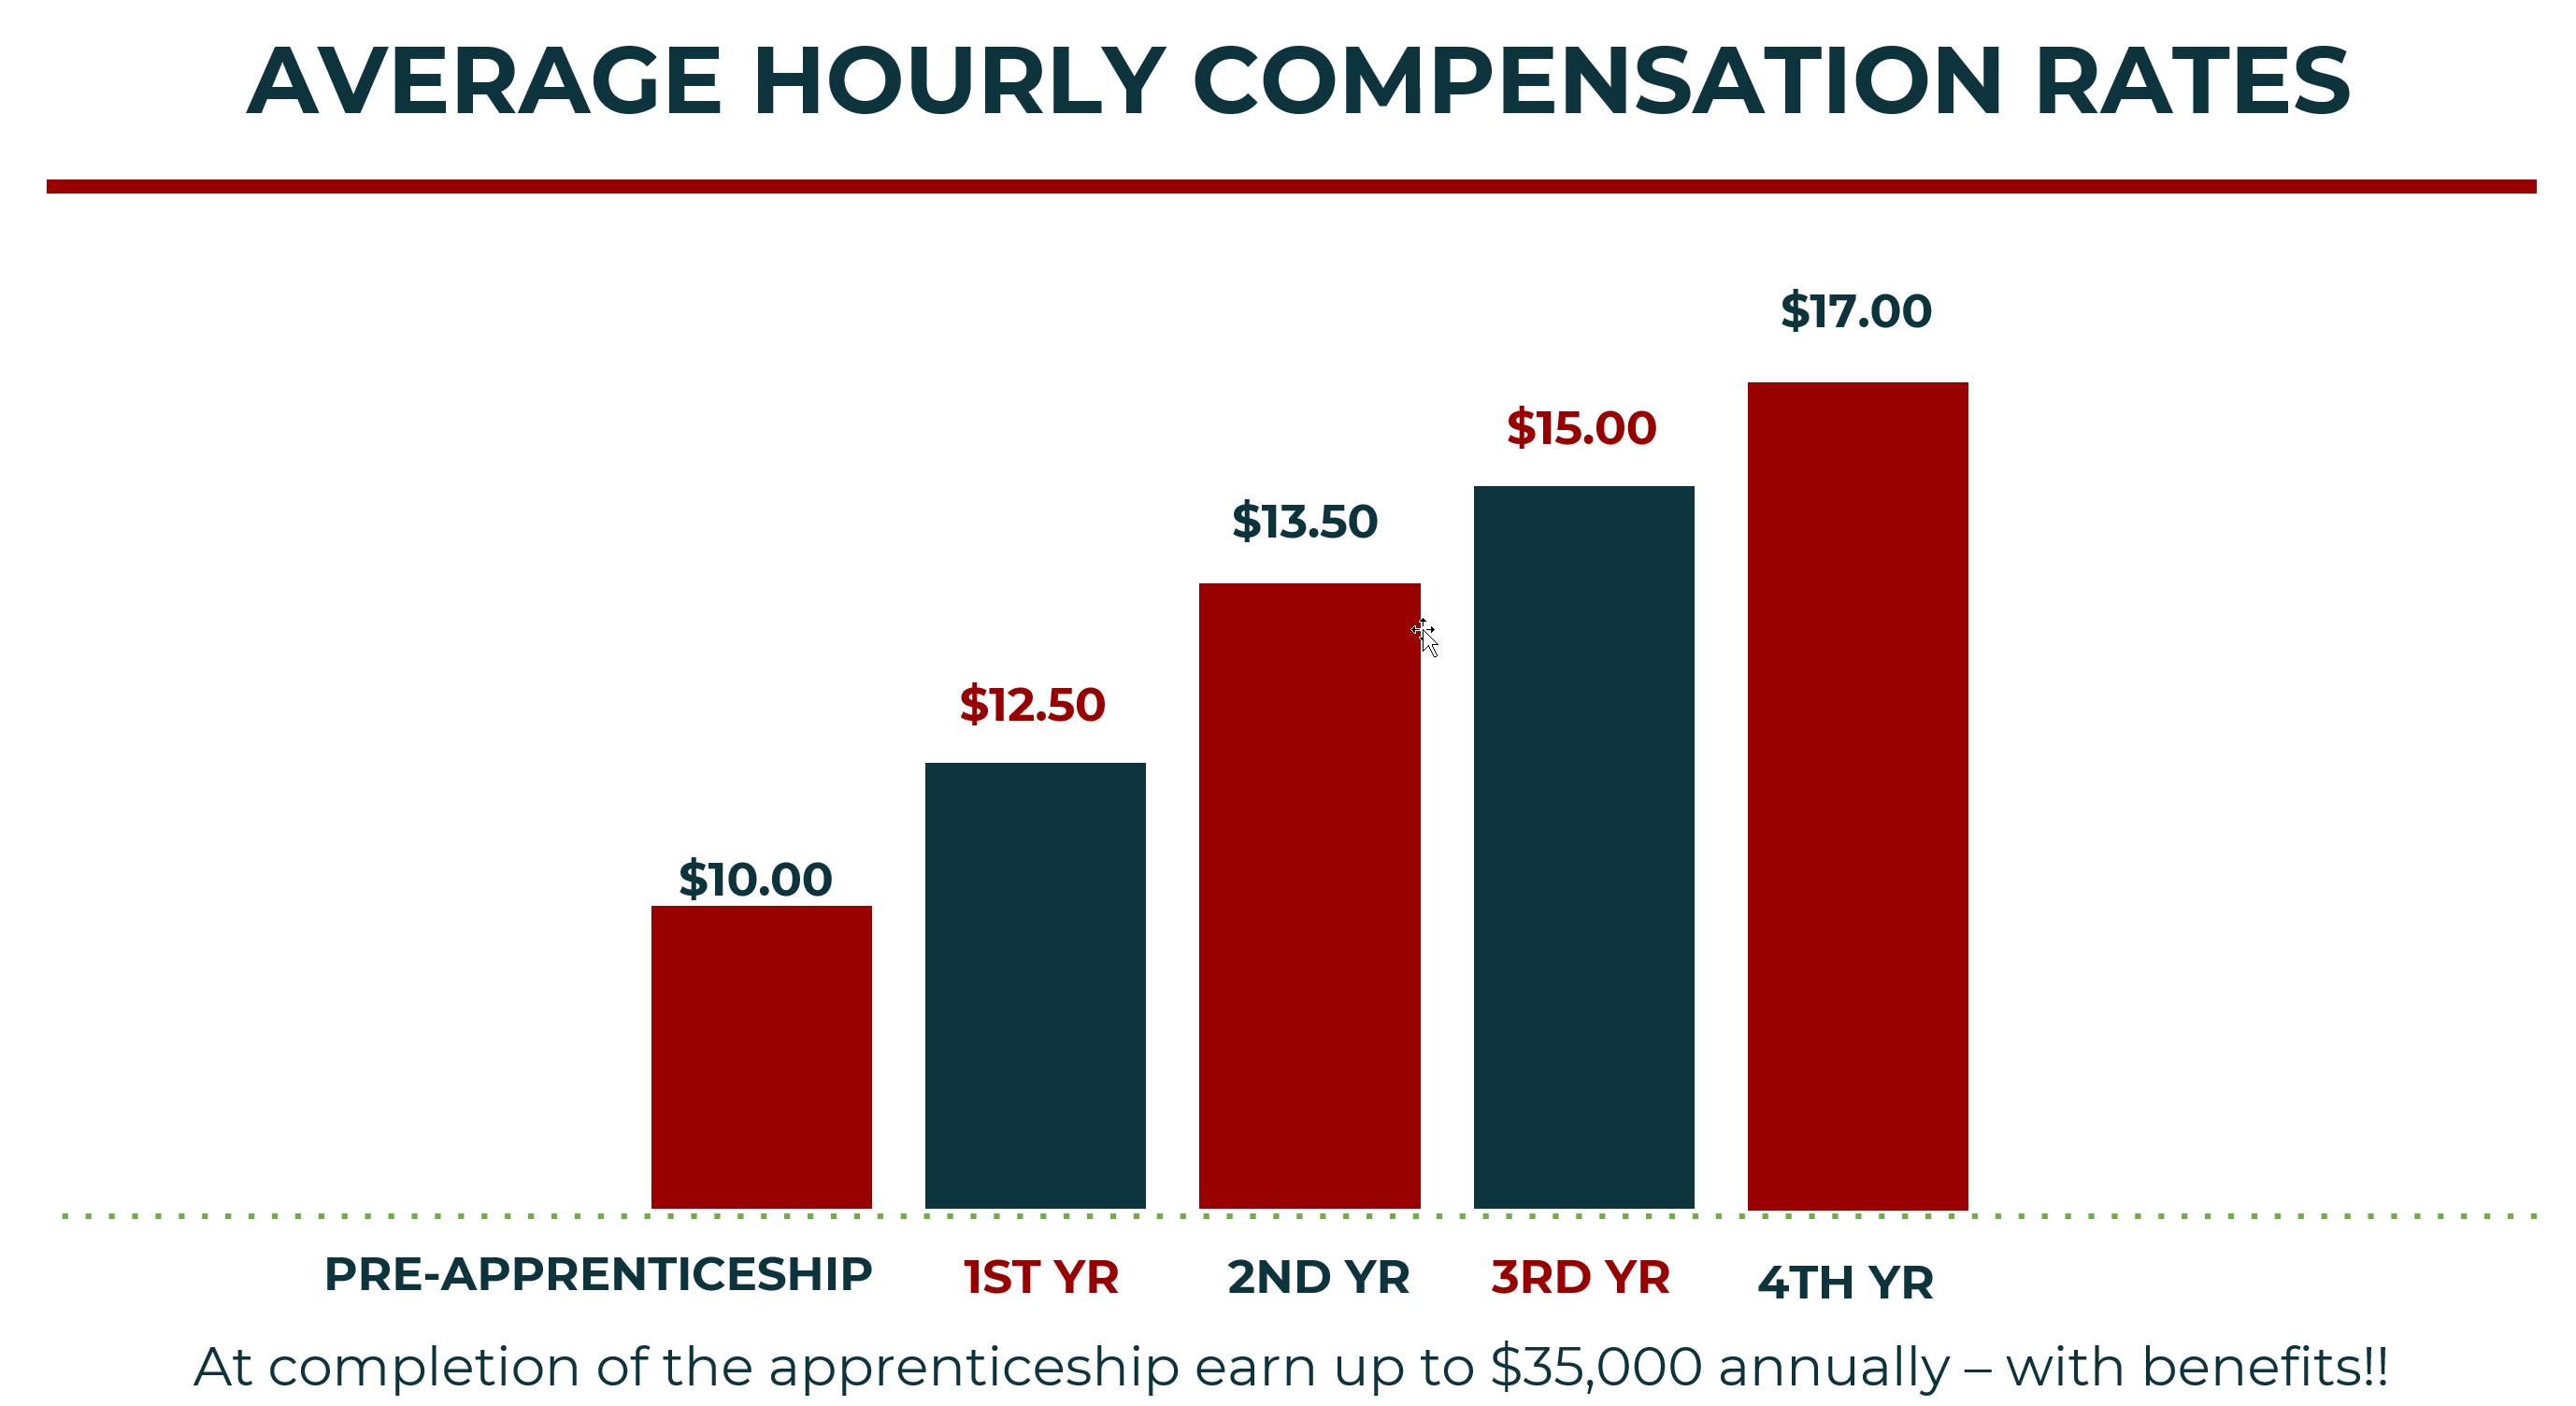 Average Hourly Compensation Rates